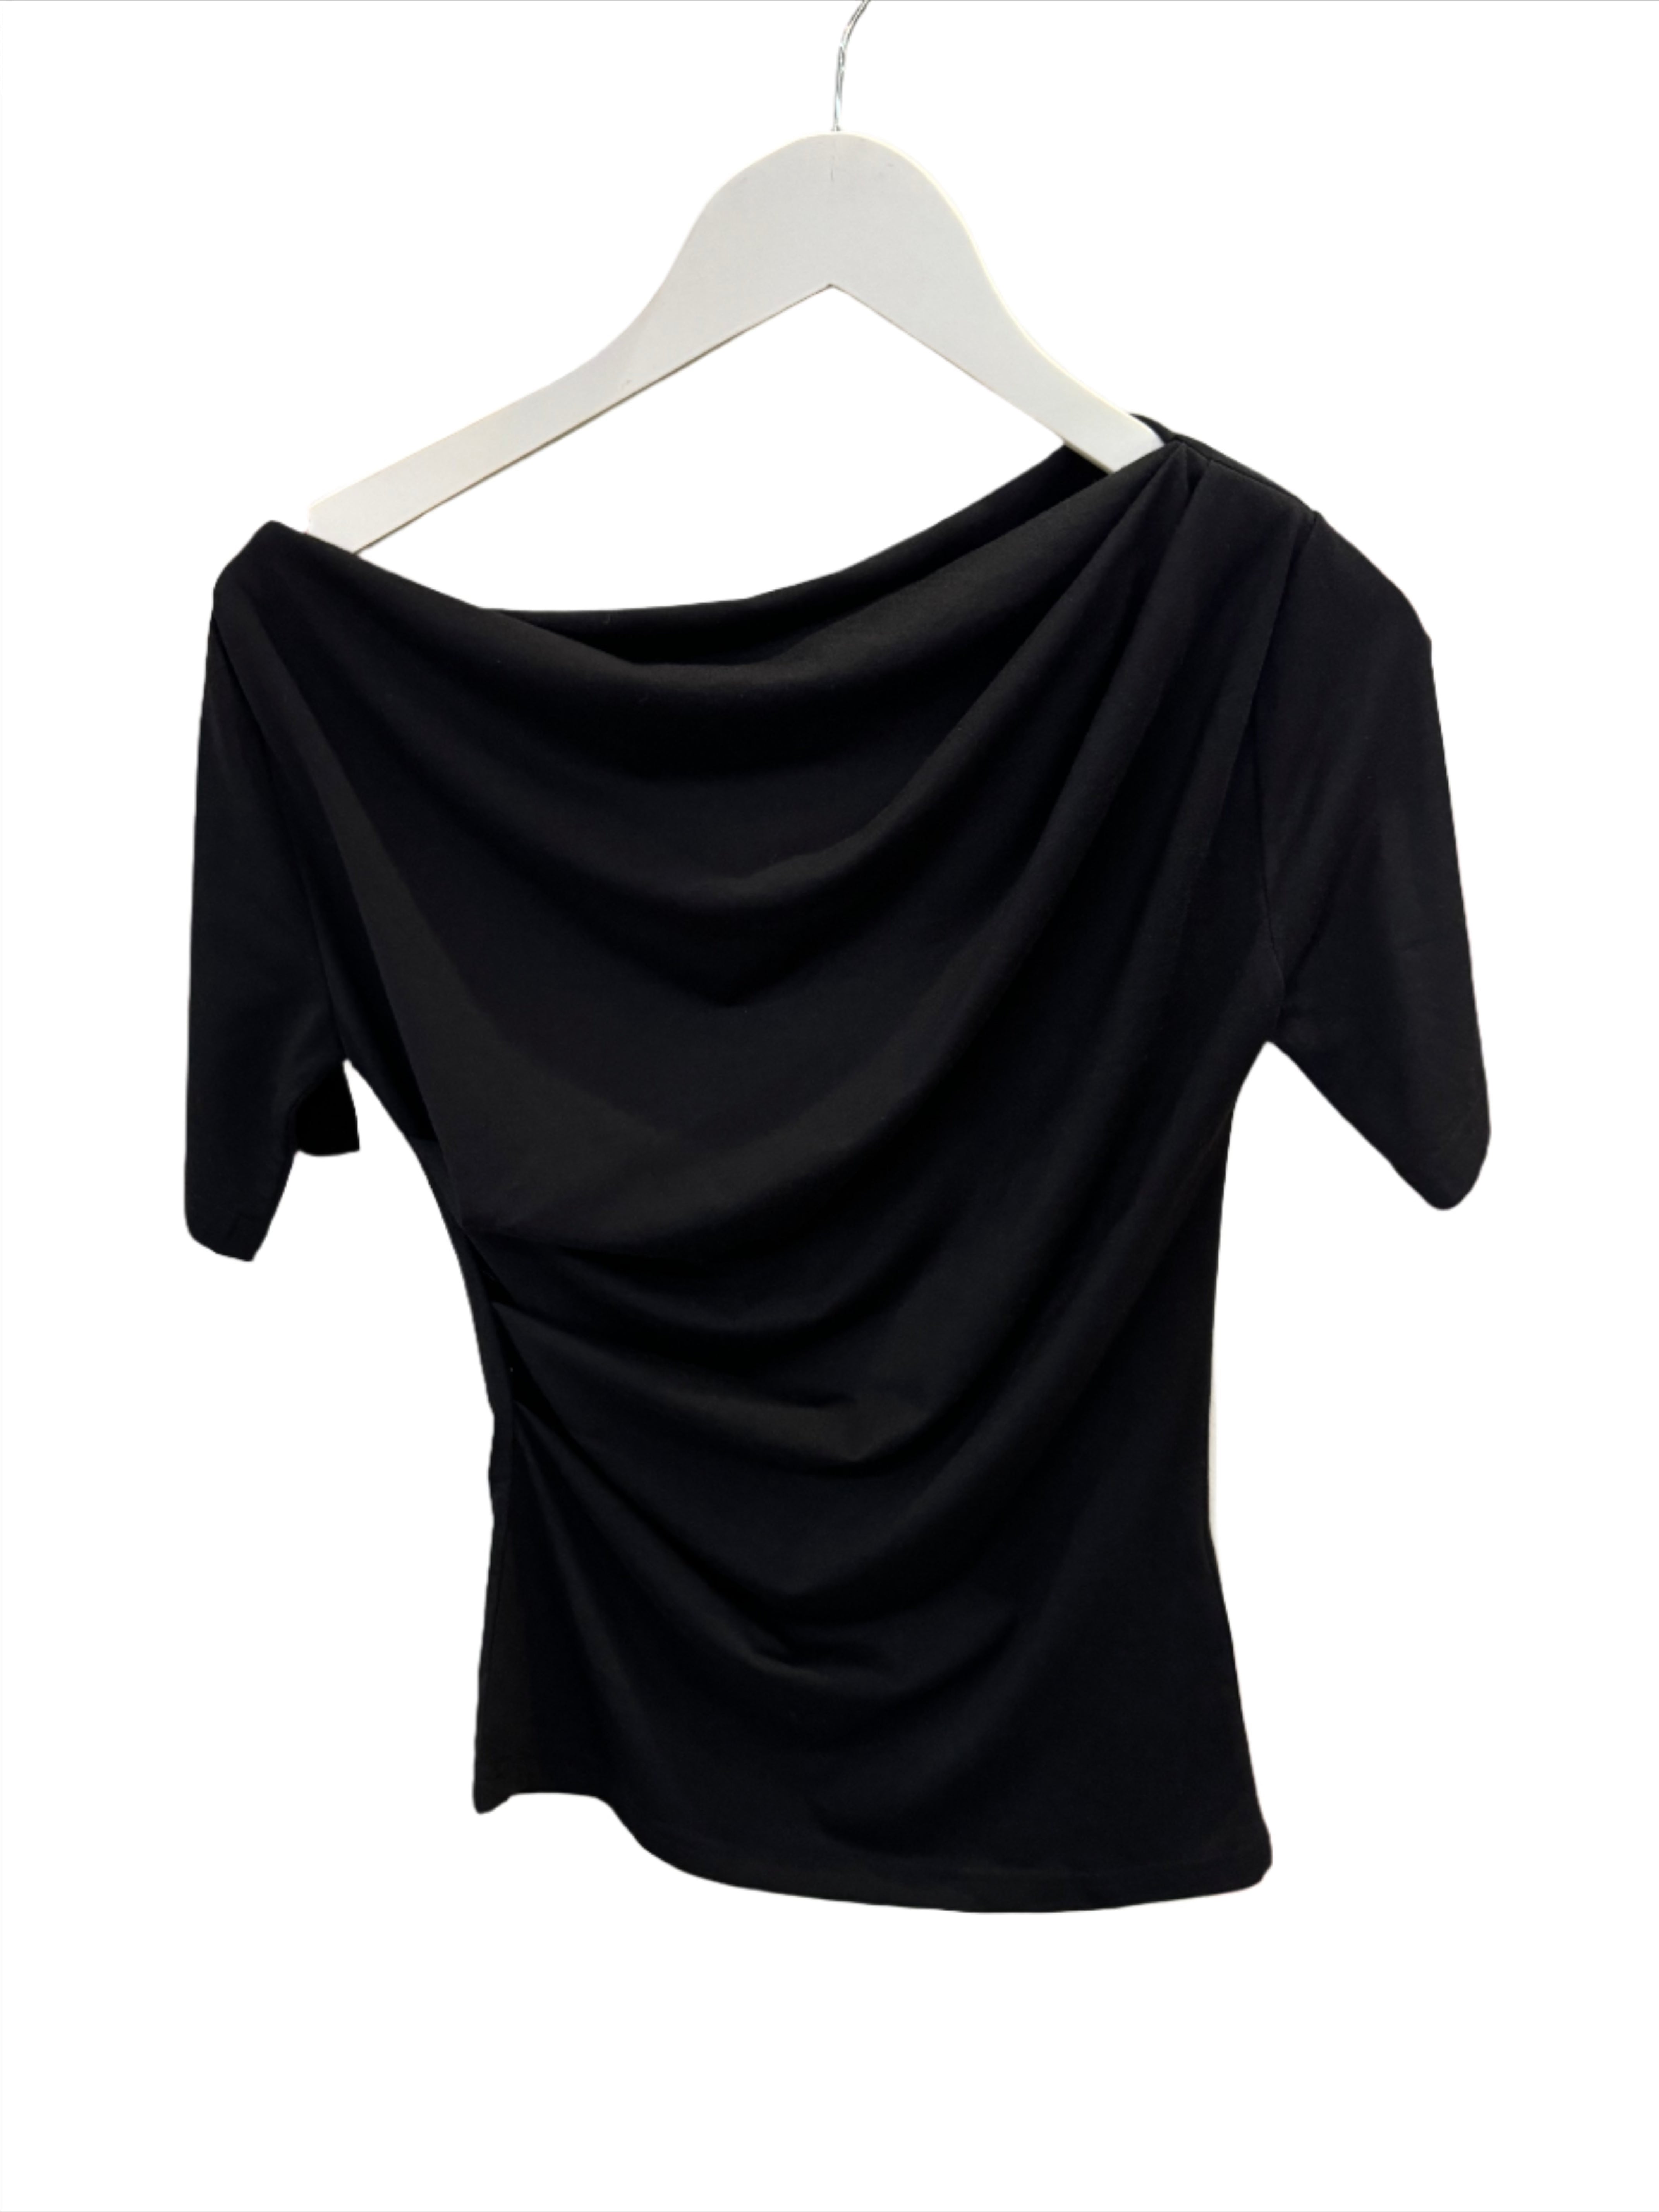 Clever Alice Off Shoulder Shirring Tee in Black or White